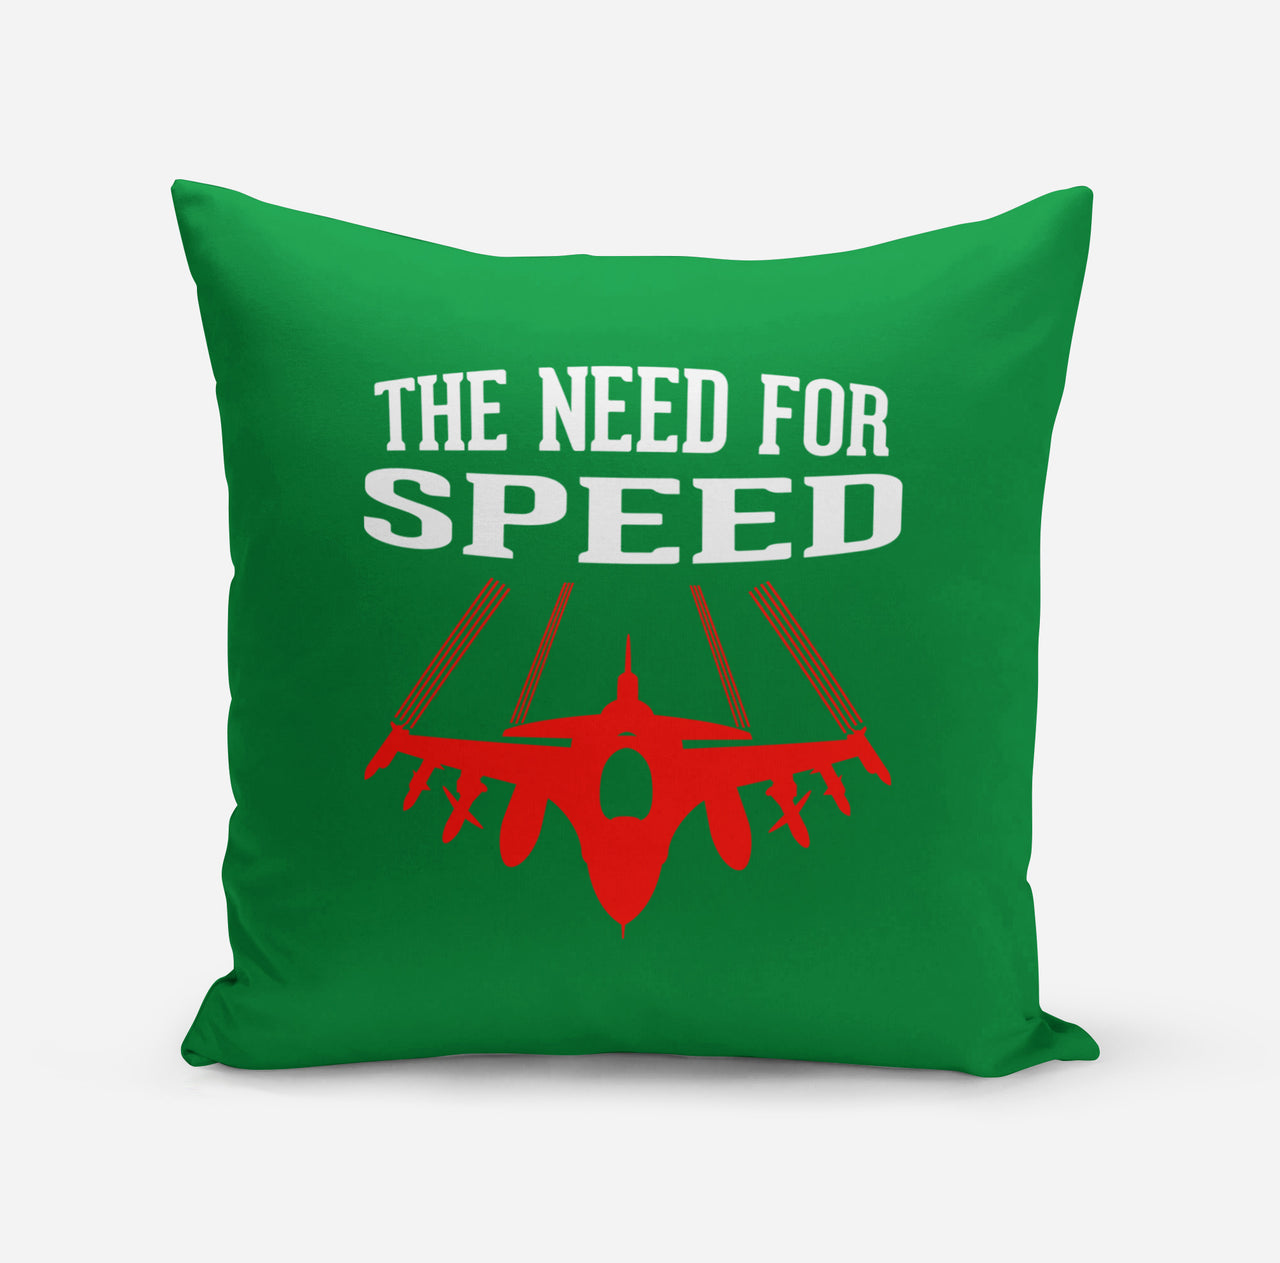 The Need For Speed Designed Pillows